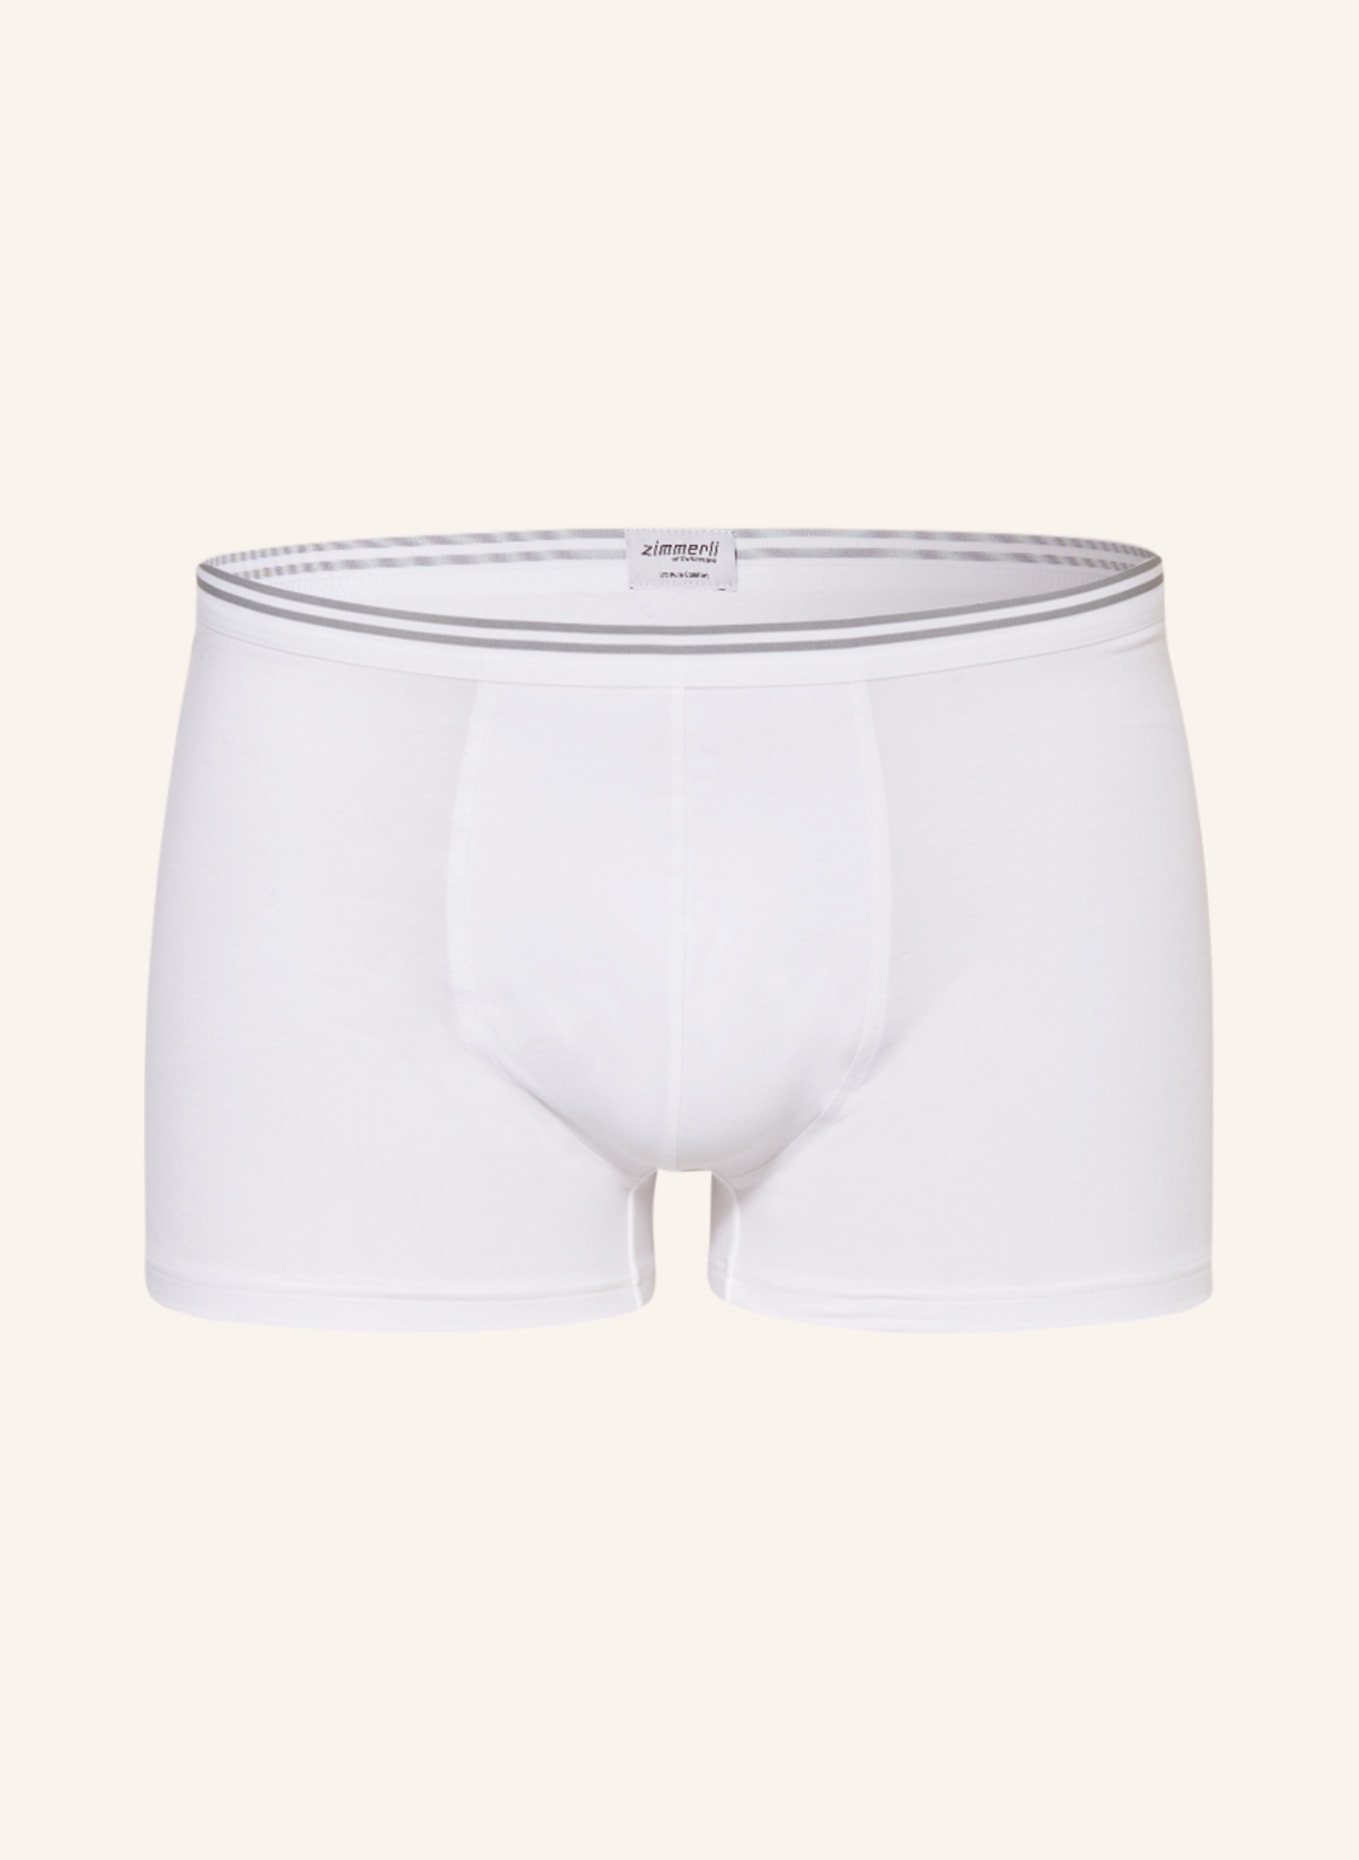 zimmerli Boxer shorts PURE COMFORT, Color: WHITE (Image 1)